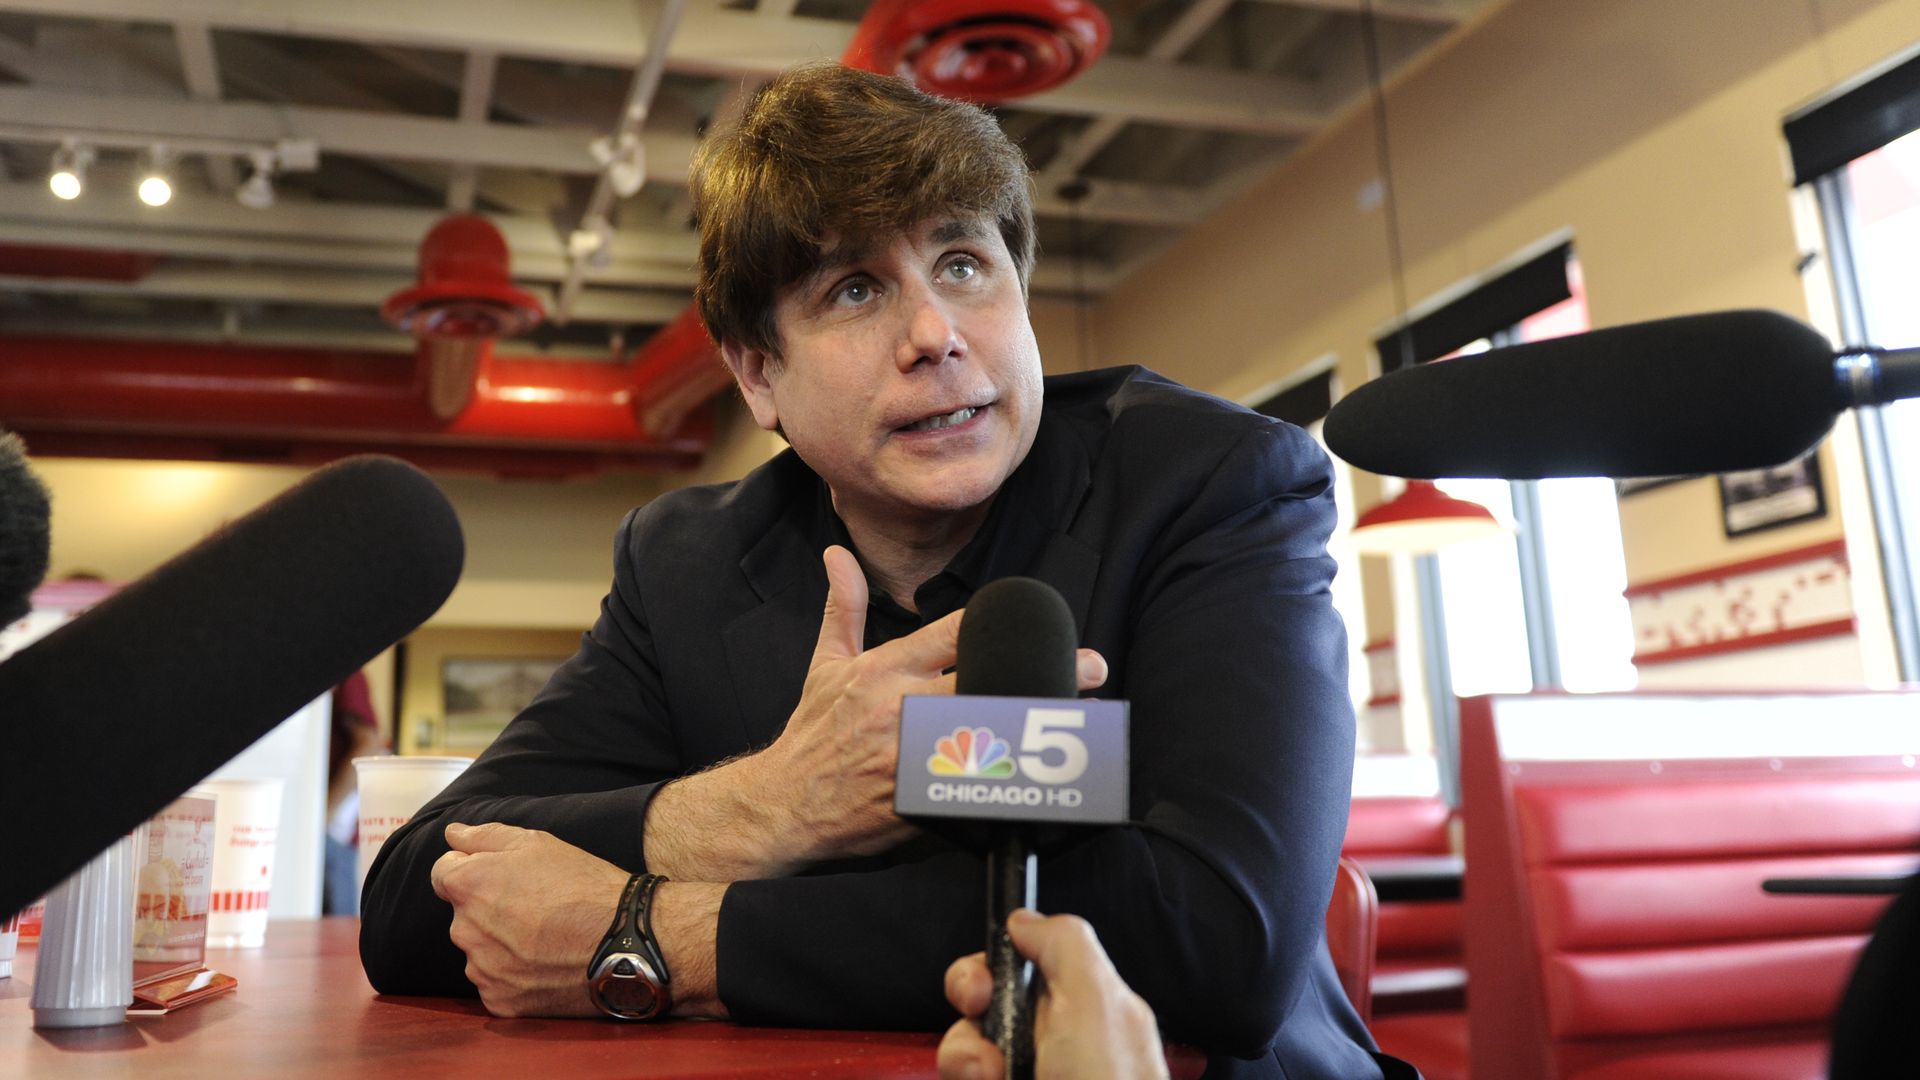 Former Illinois Gov. Rod Blagojevich at Freddy's Frozen Custard & Steakburgers before turning himself in to prison in Littleton, Colorado, to begin his 14-year prison sentence